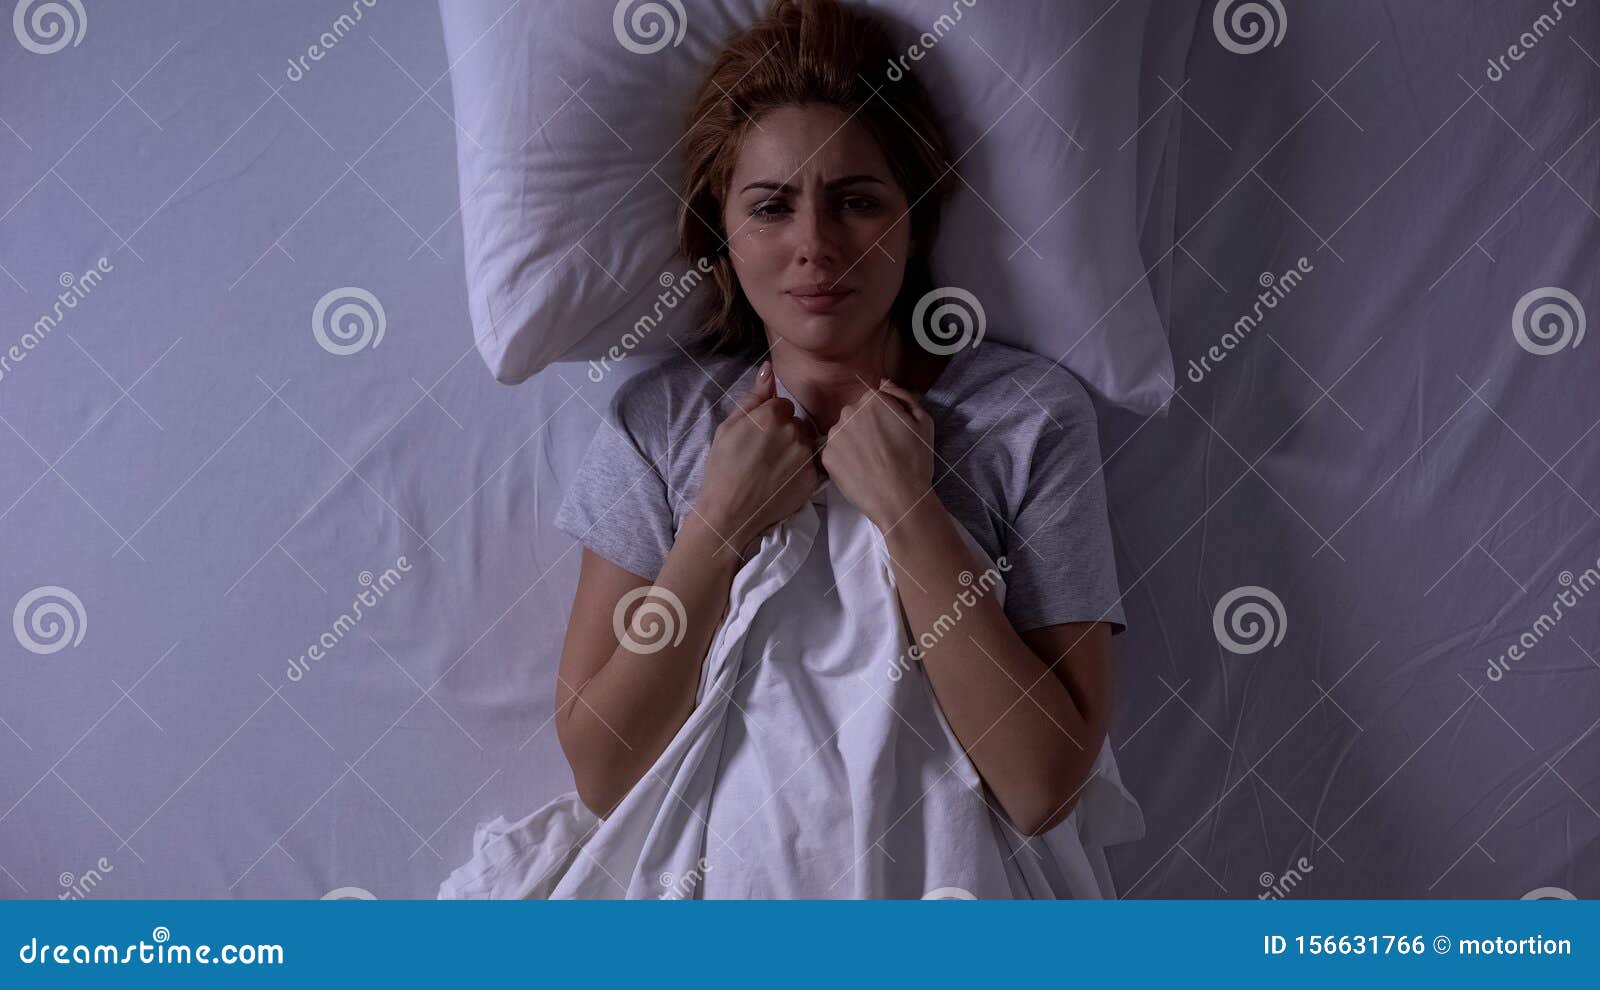 attractive woman crying lying in bed at night, female weakness and fragility